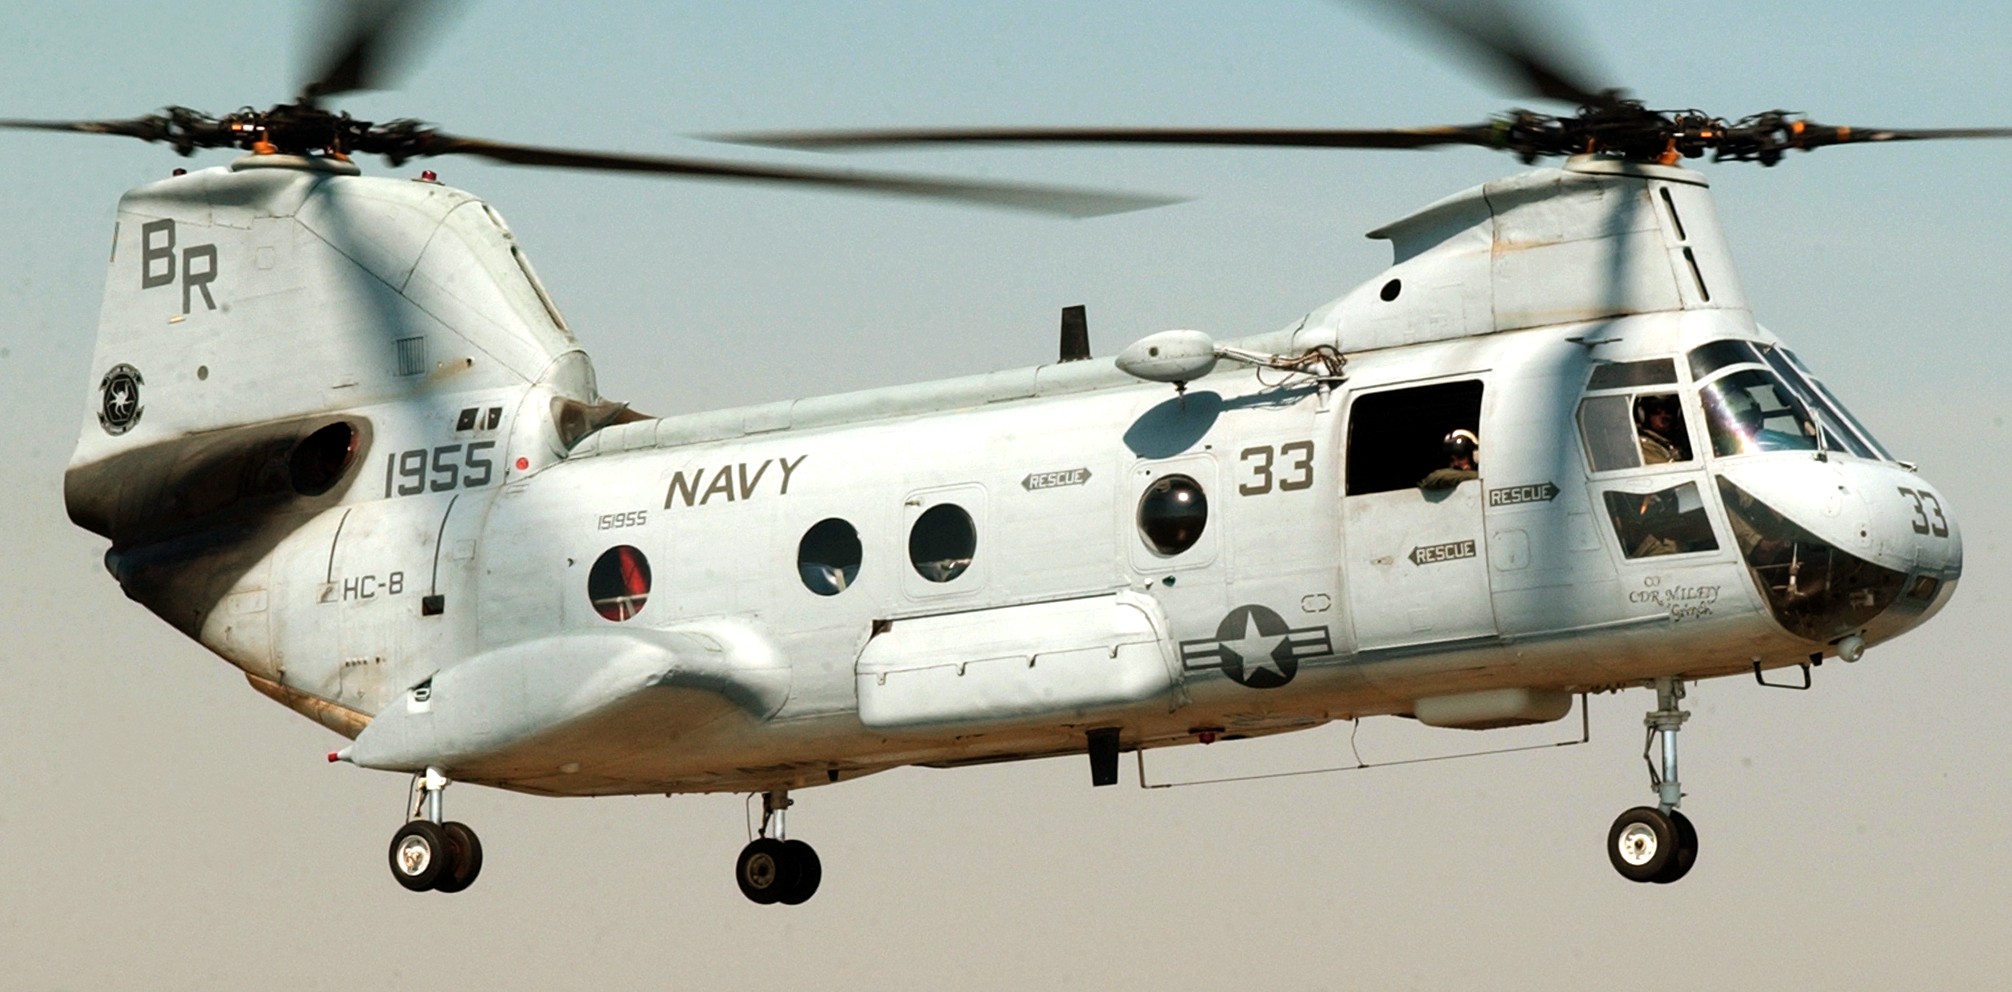 hc-8 dragon whales helicopter combat support squadron navy ch-46d sea knight 05 norfolk